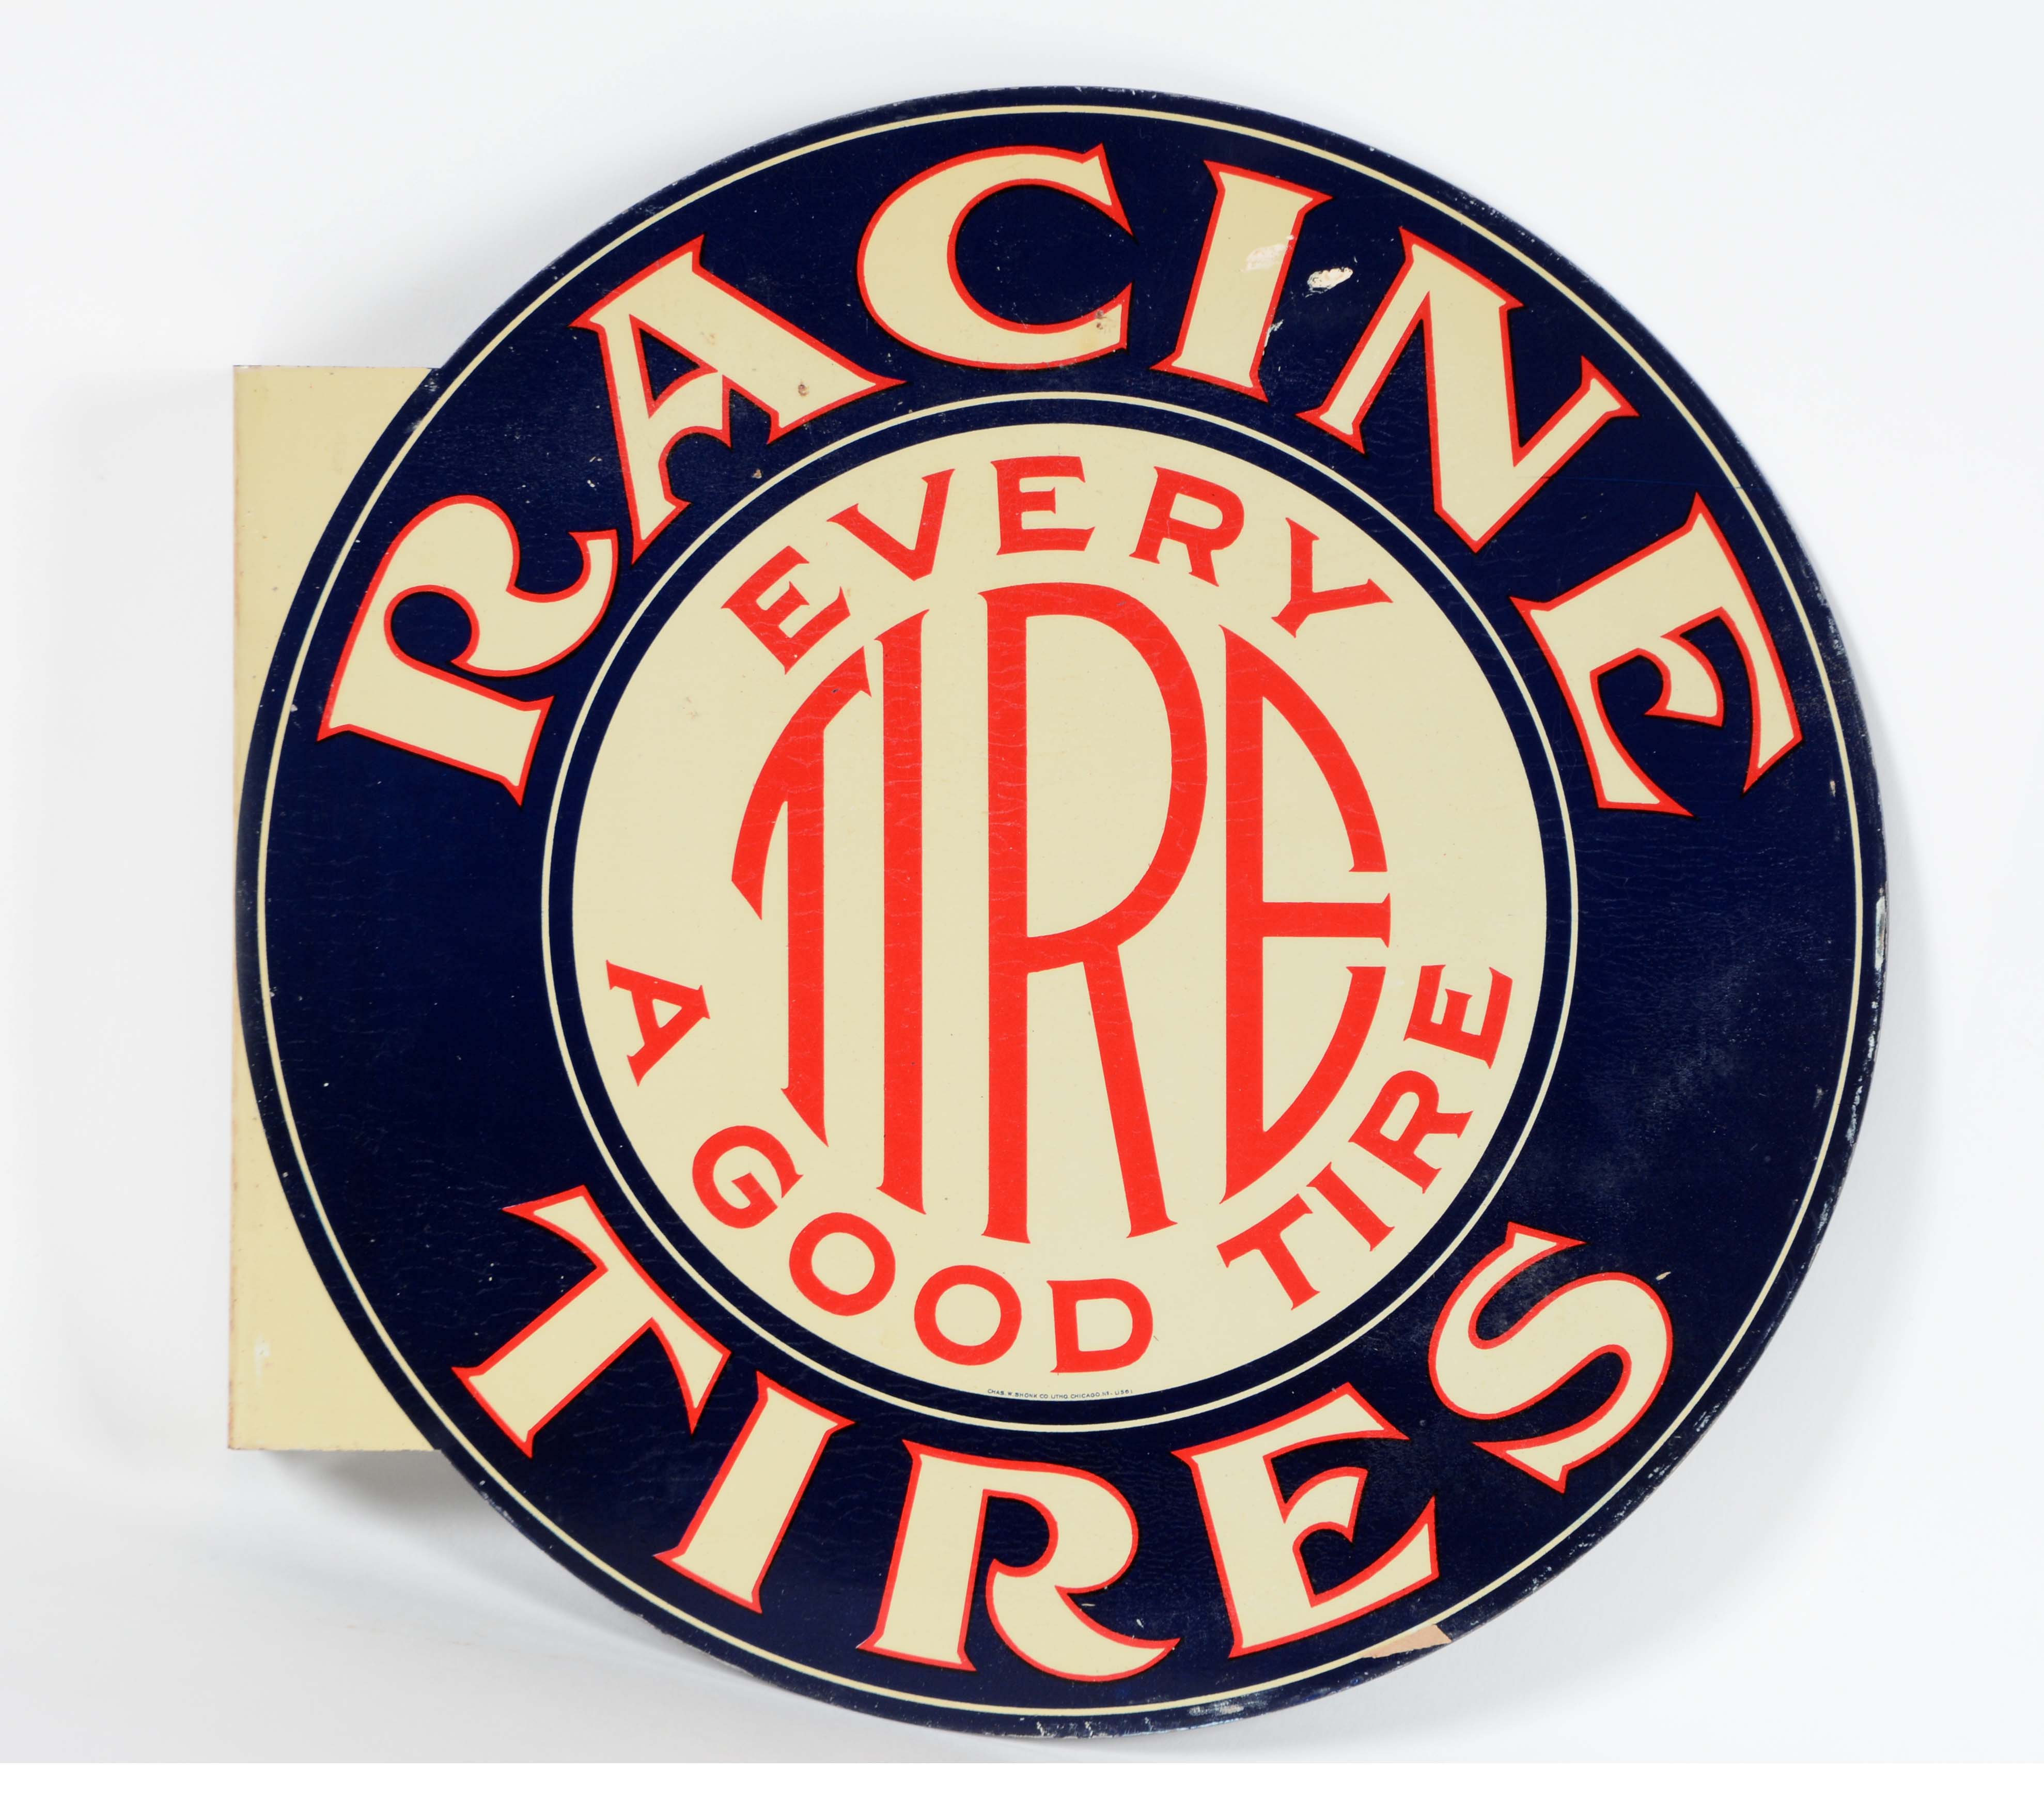 New Old Stock Racine Tires Tin Flange Sign, estimated at $2,500-3,500.